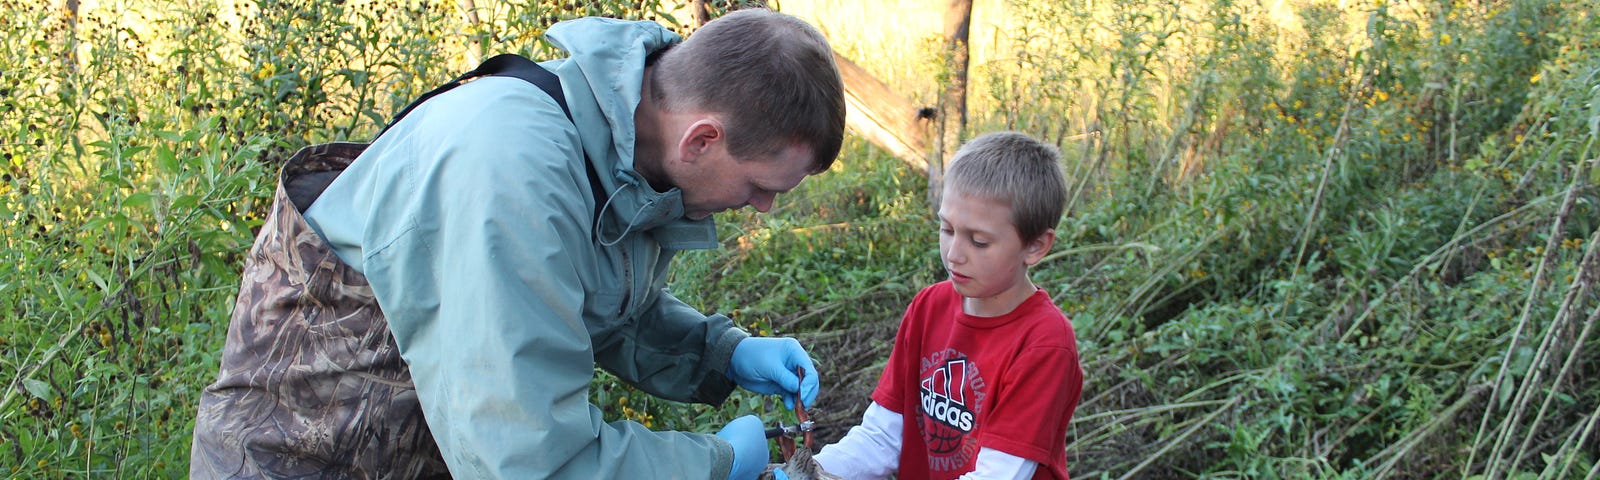 Tom Cooper, FWS Scholar, at work banding birds and educating kids about his work with the Service.